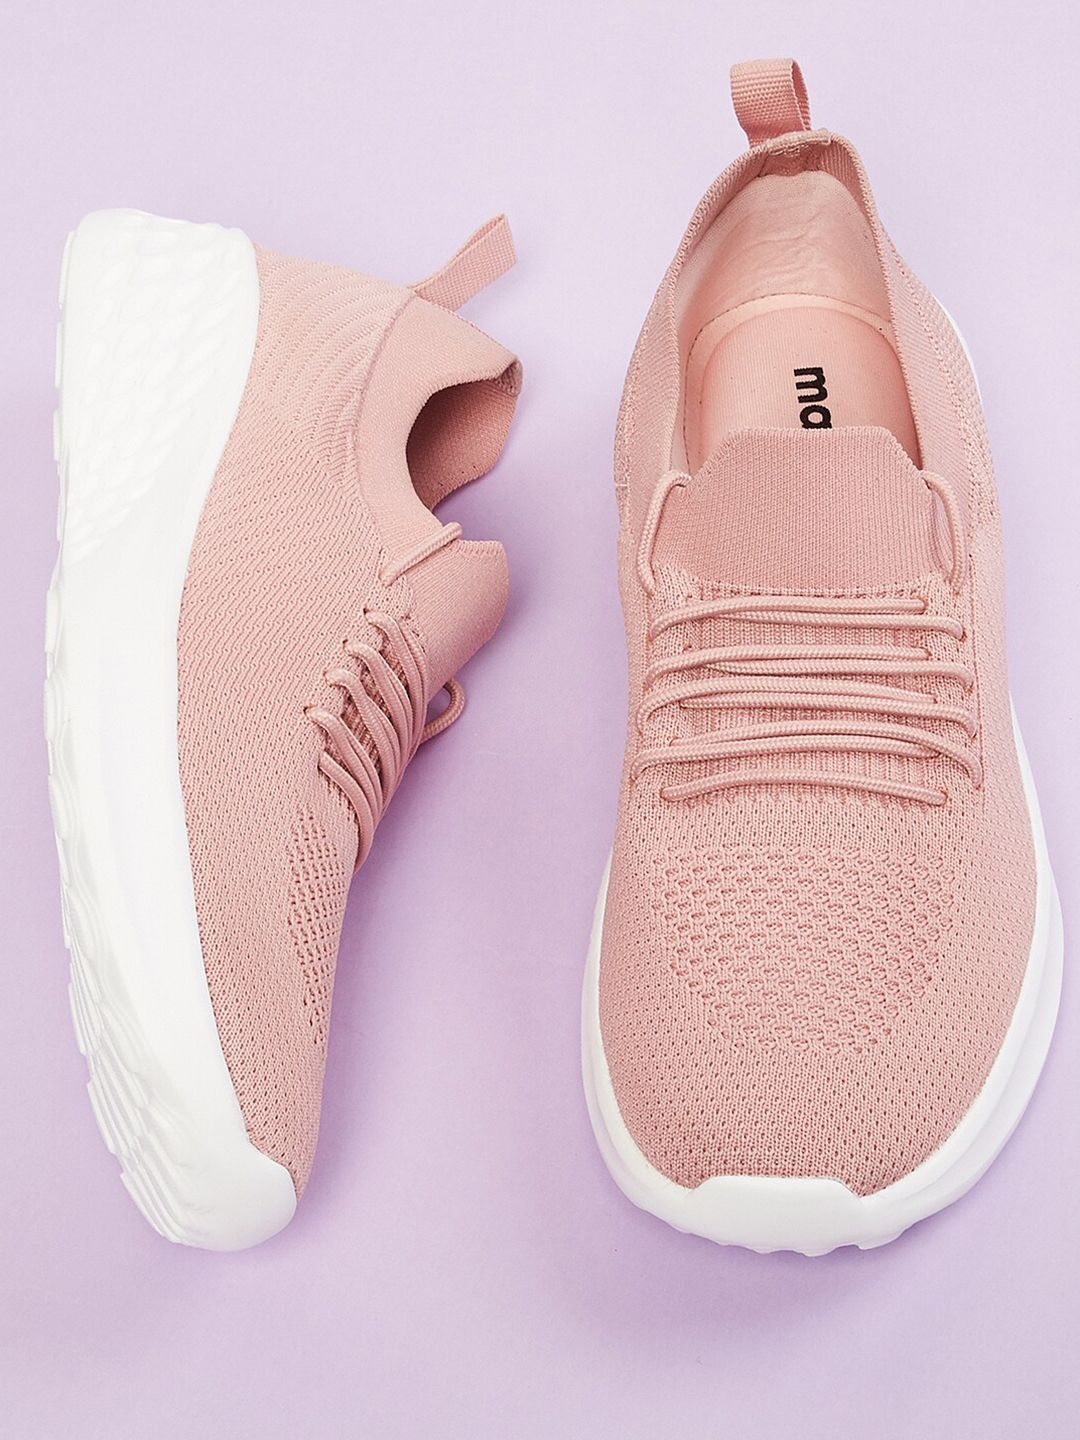 max Women Peach-Coloured Mesh Walking Shoes Price in India